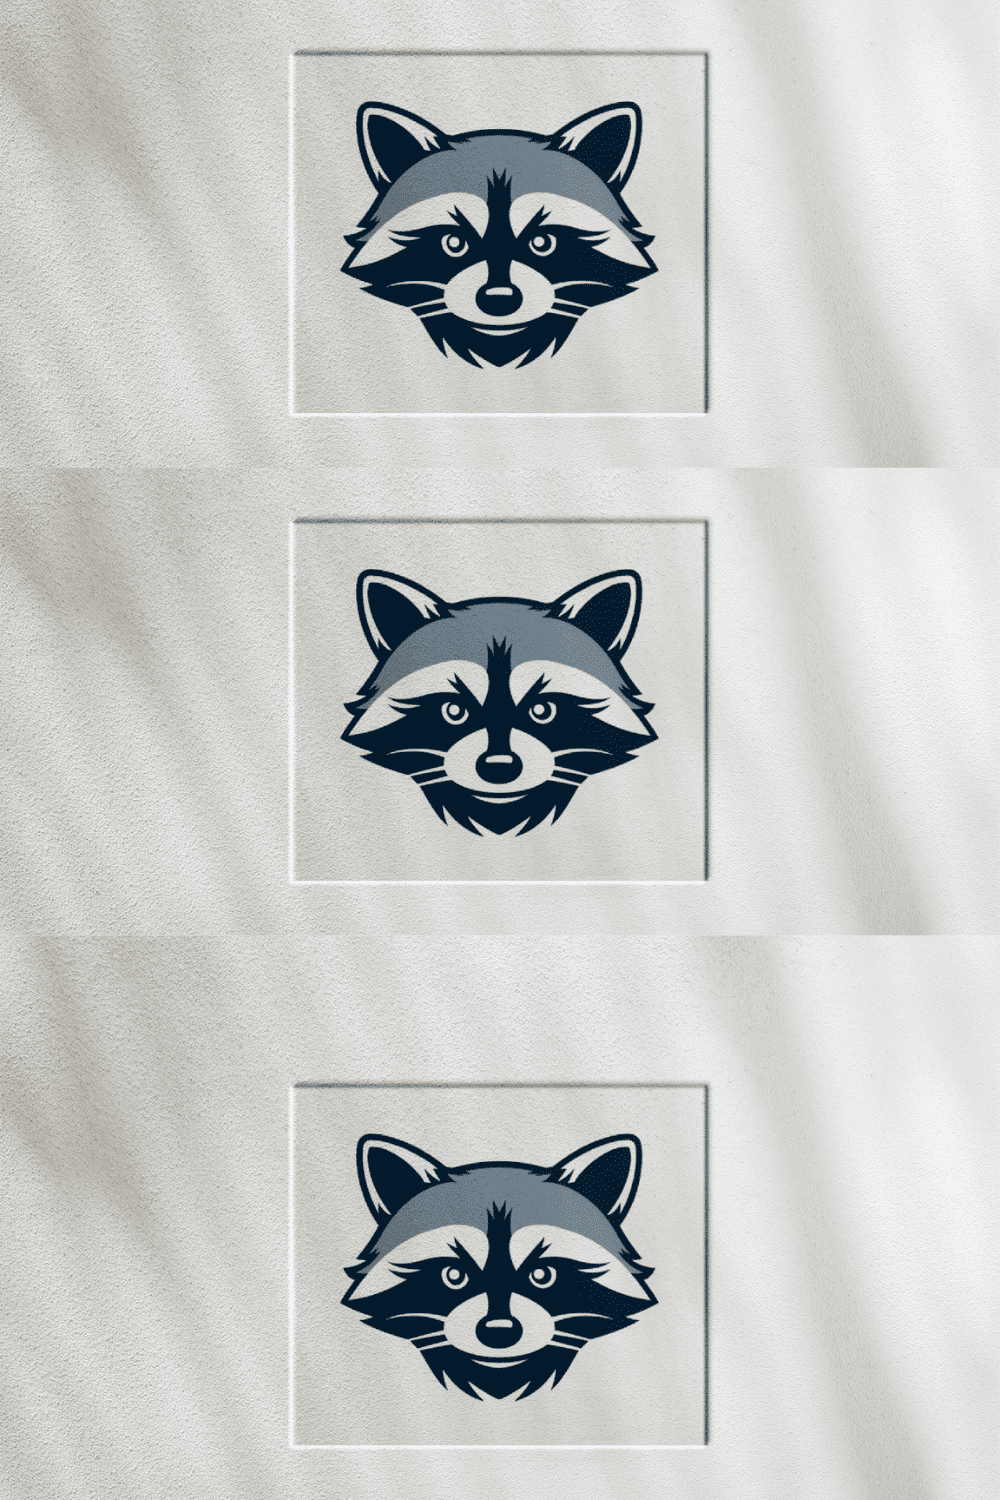 Racoon Logo pinterest preview image.